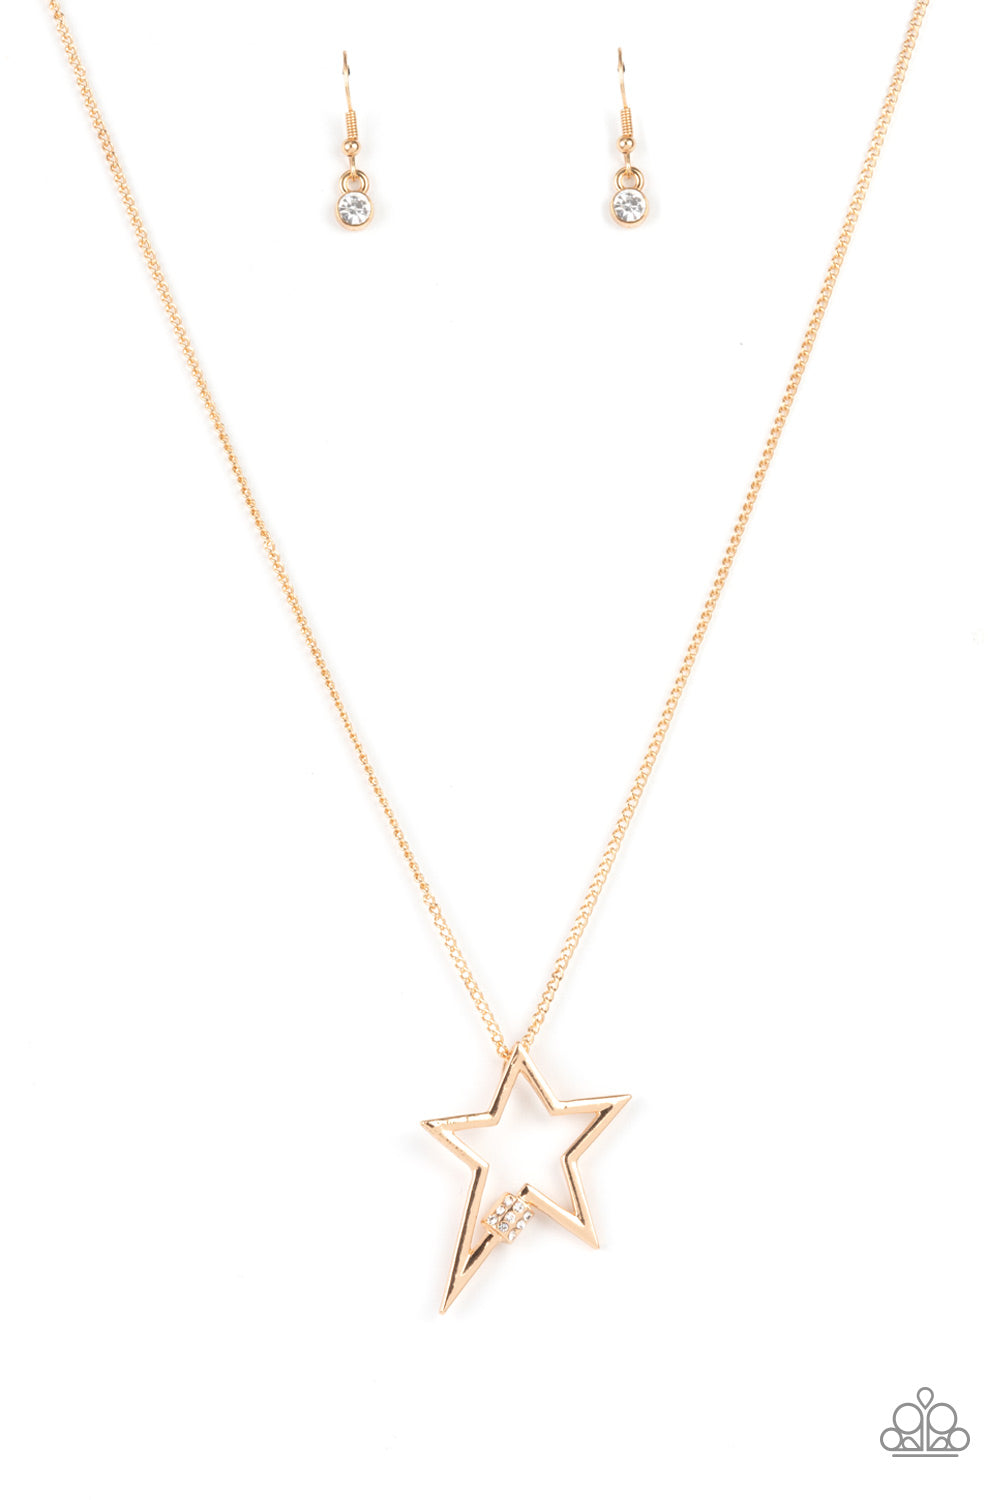 PRE-ORDER - Light Up The Sky - Gold - Paparazzi Necklace